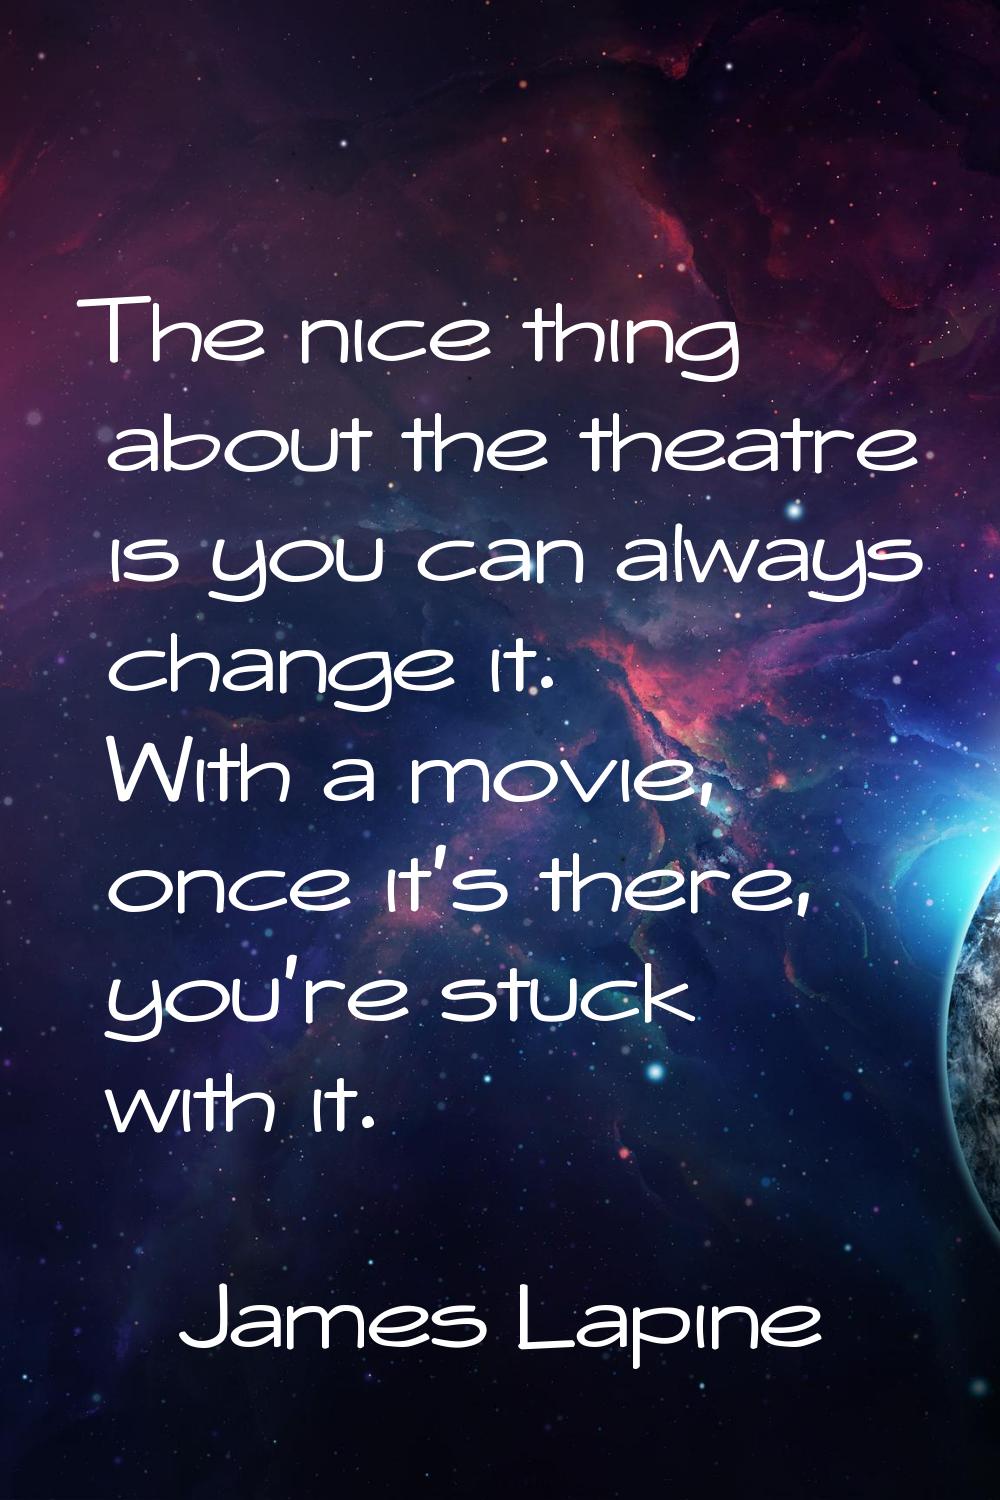 The nice thing about the theatre is you can always change it. With a movie, once it's there, you're